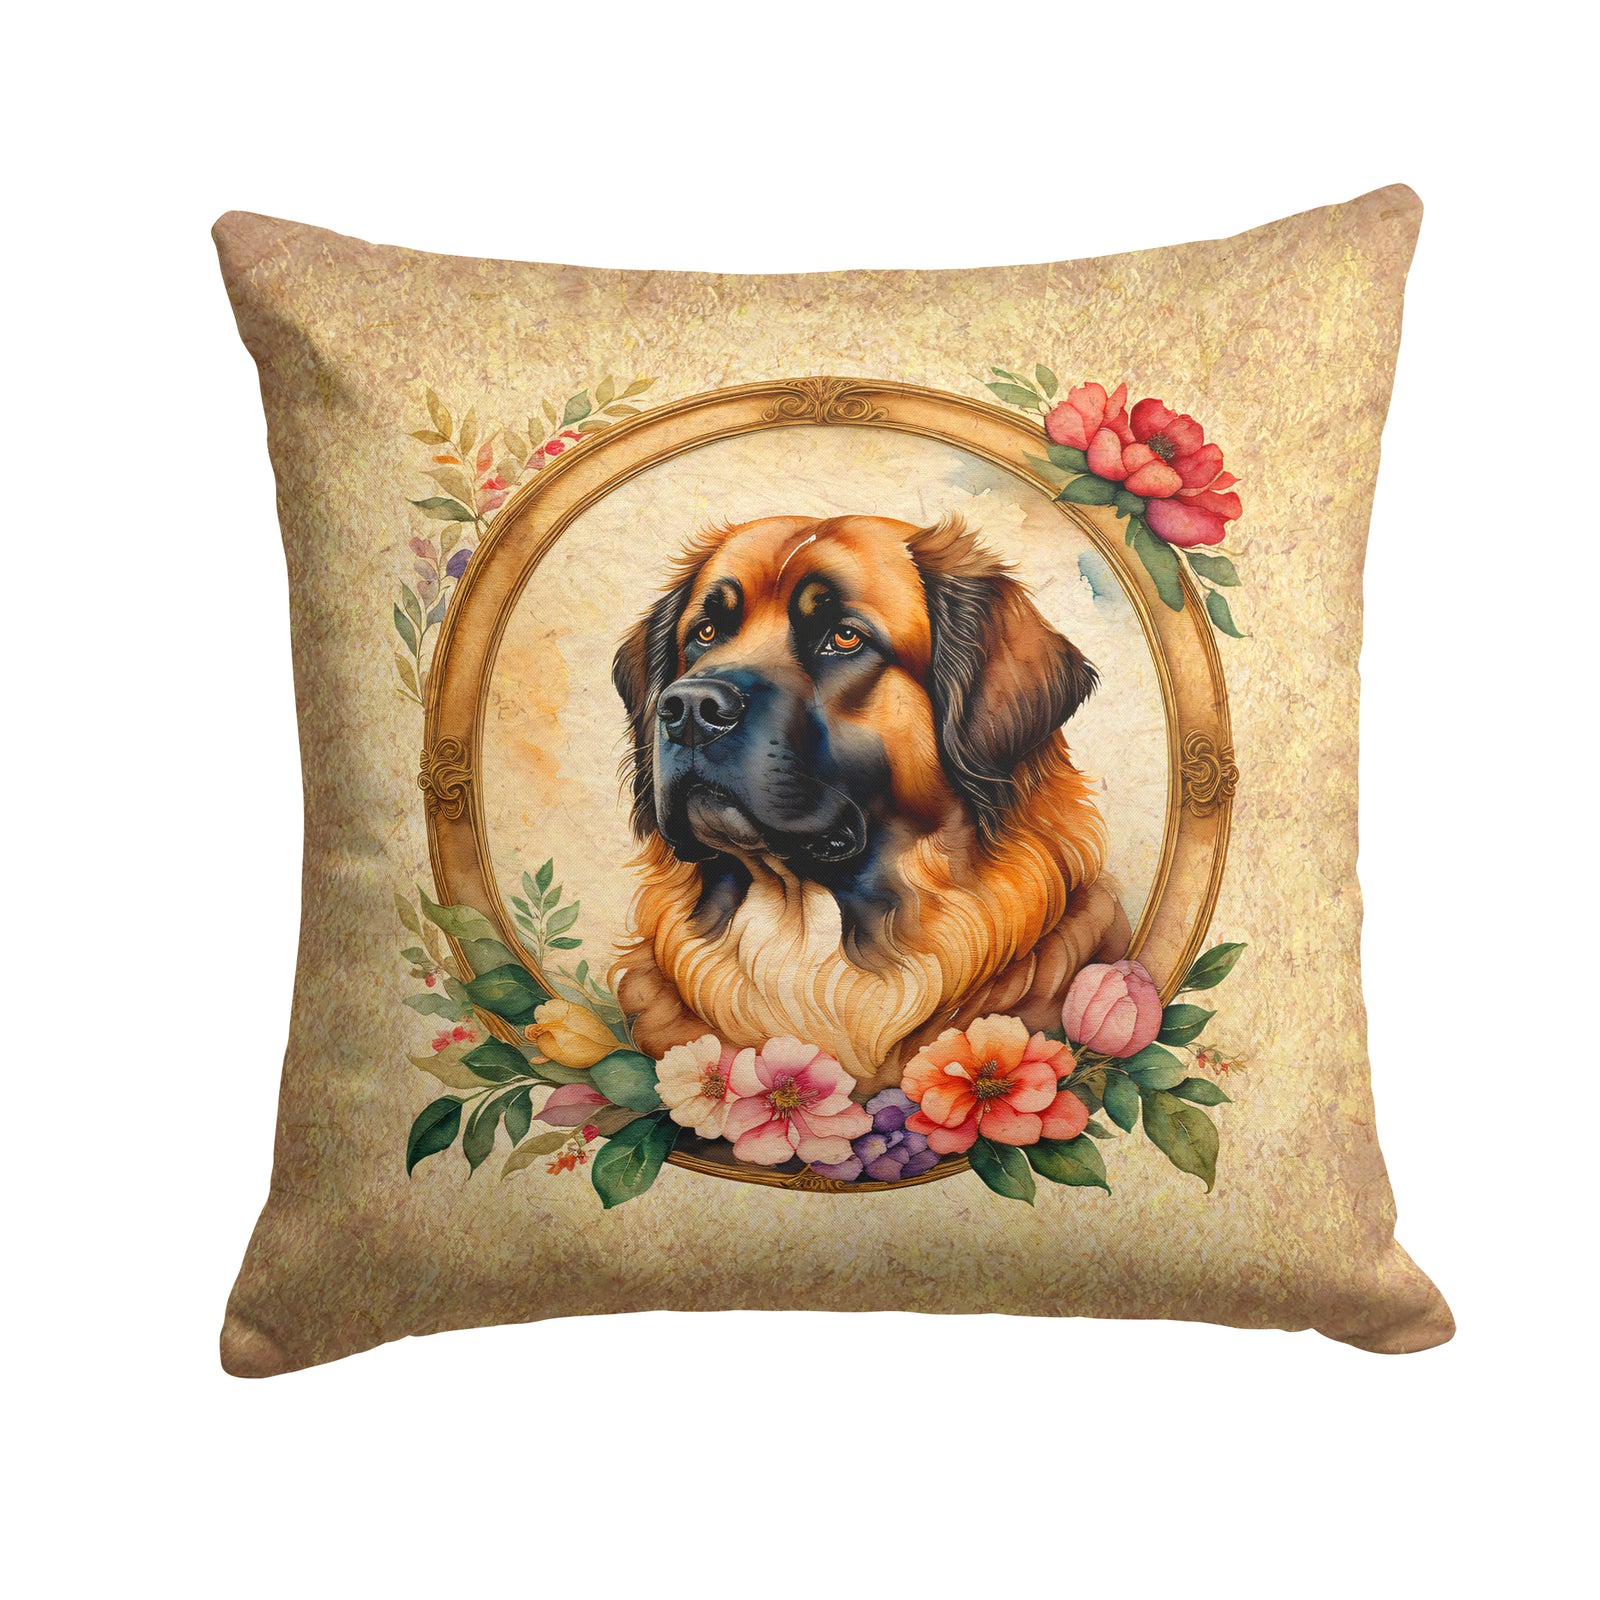 Buy this Leonberger and Flowers Fabric Decorative Pillow